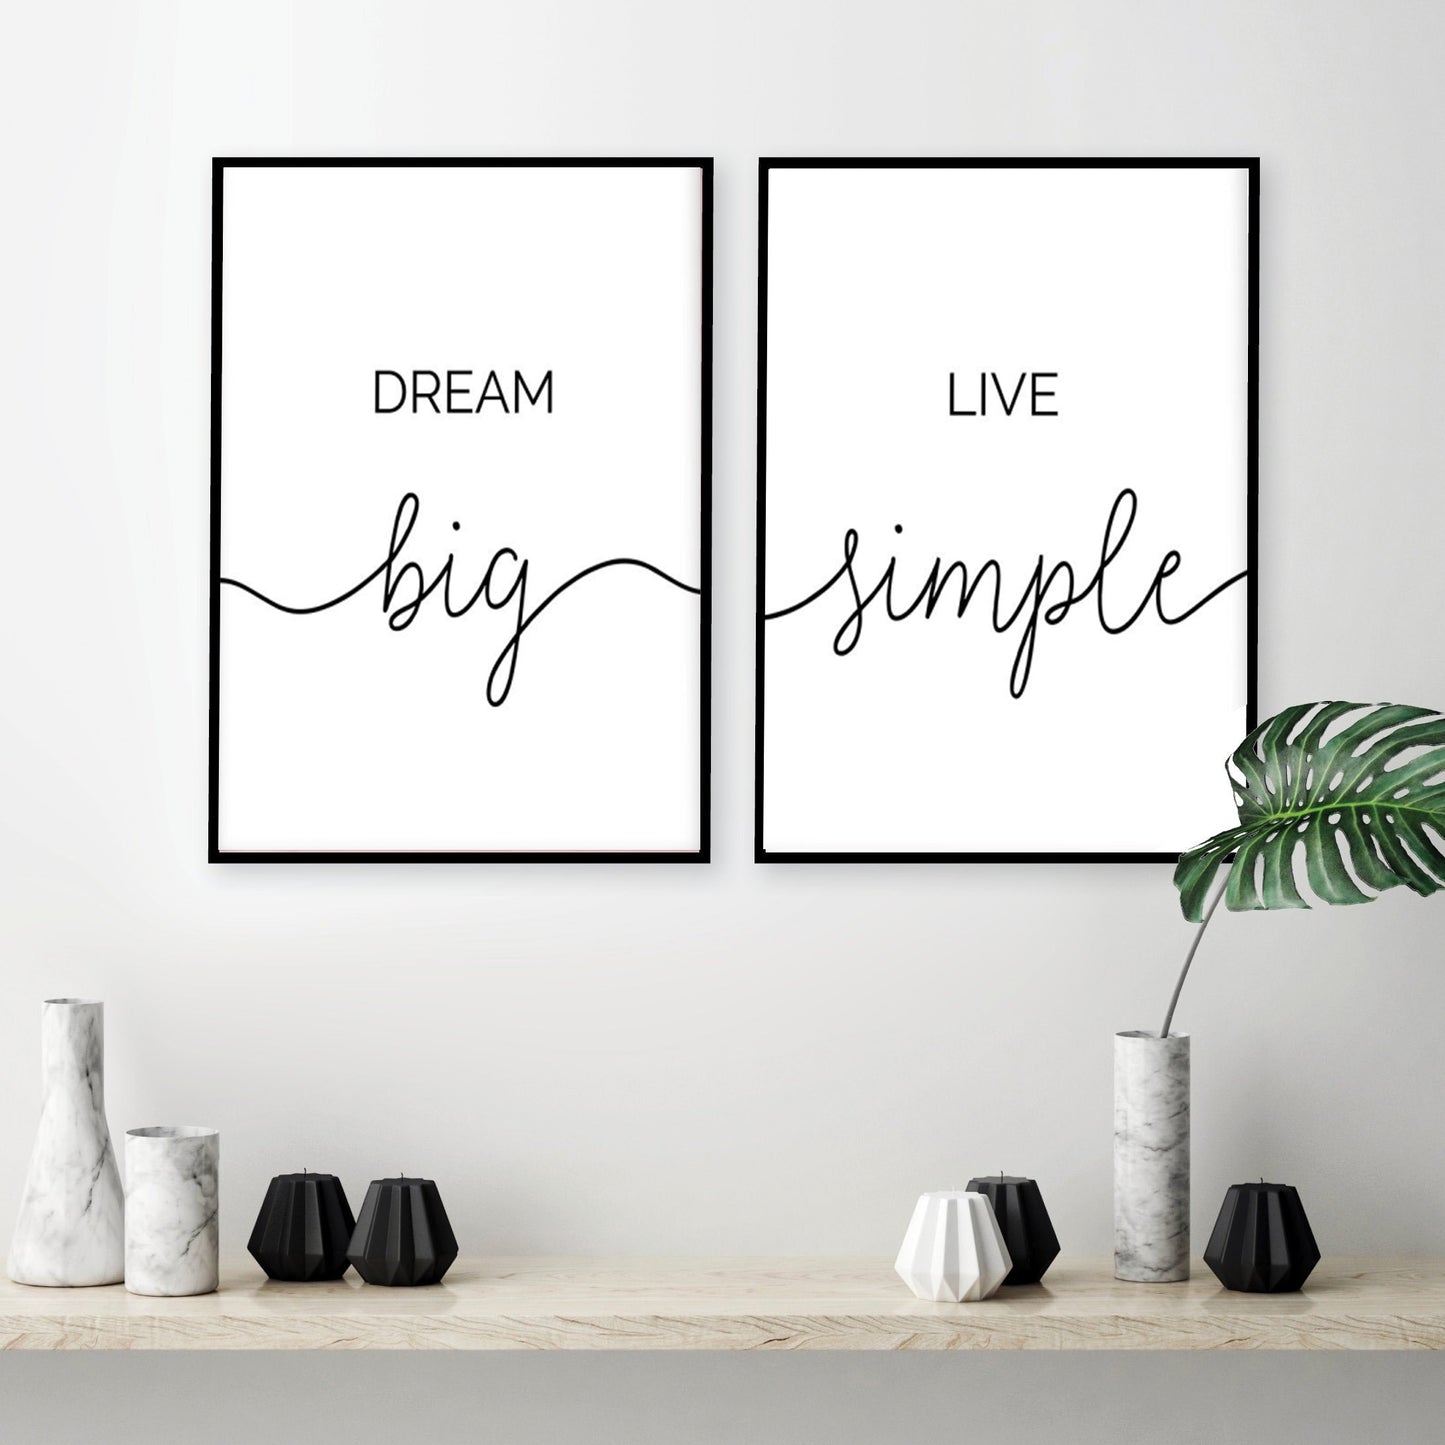 Black & White Life Quotes Wall Art Minimalist Inspirational Letters And Quotes Fine Art Canvas Prints Nordic Style Posters For Modern Home Decor